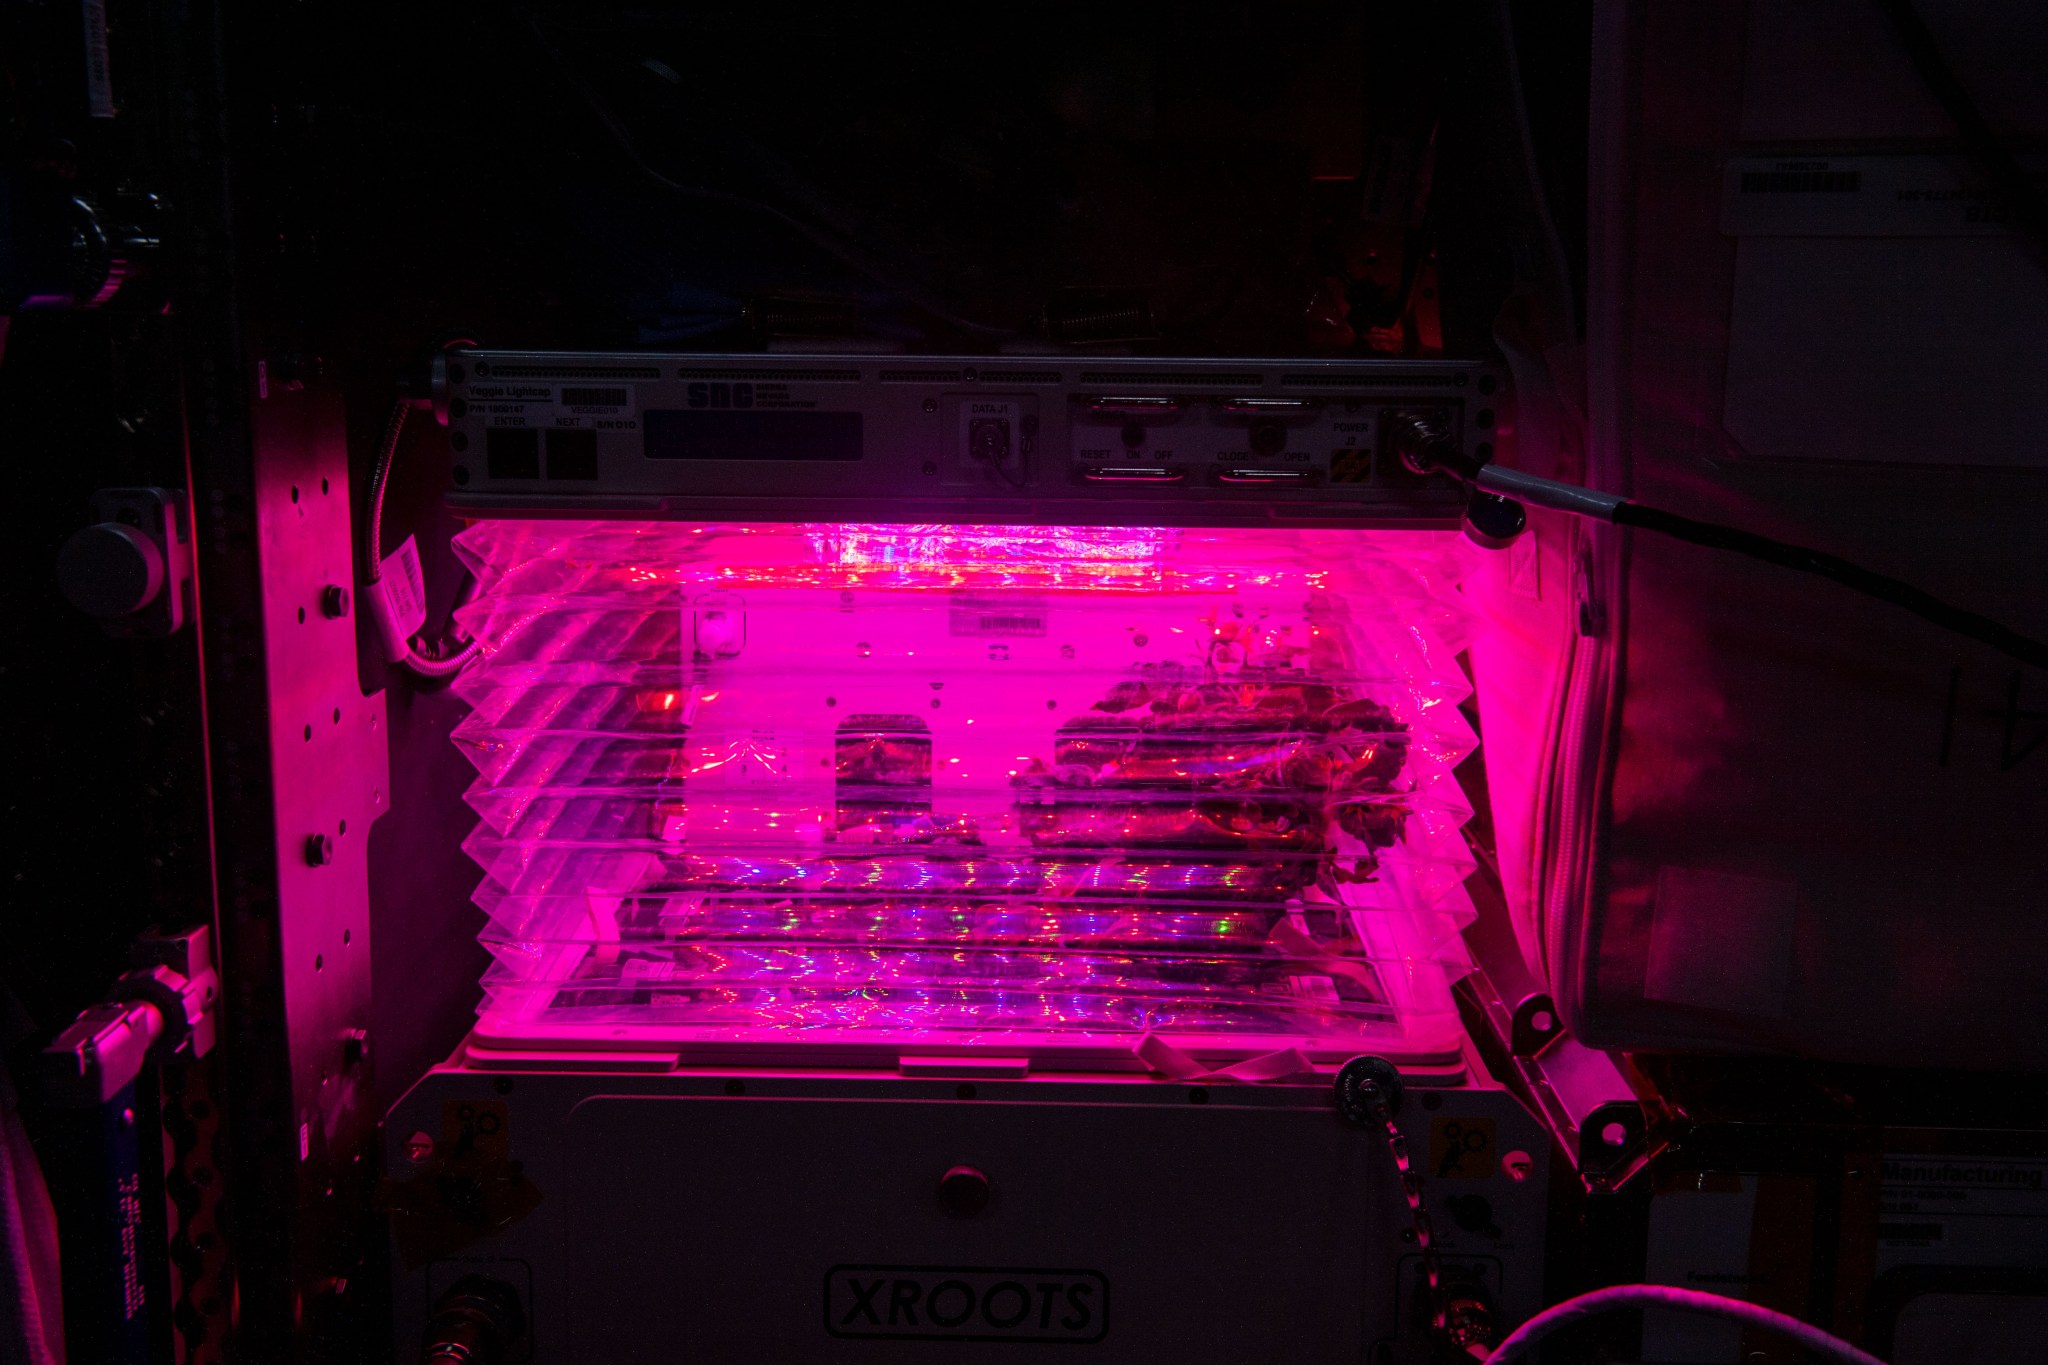 image of the plant growth habitat with a pink lighting